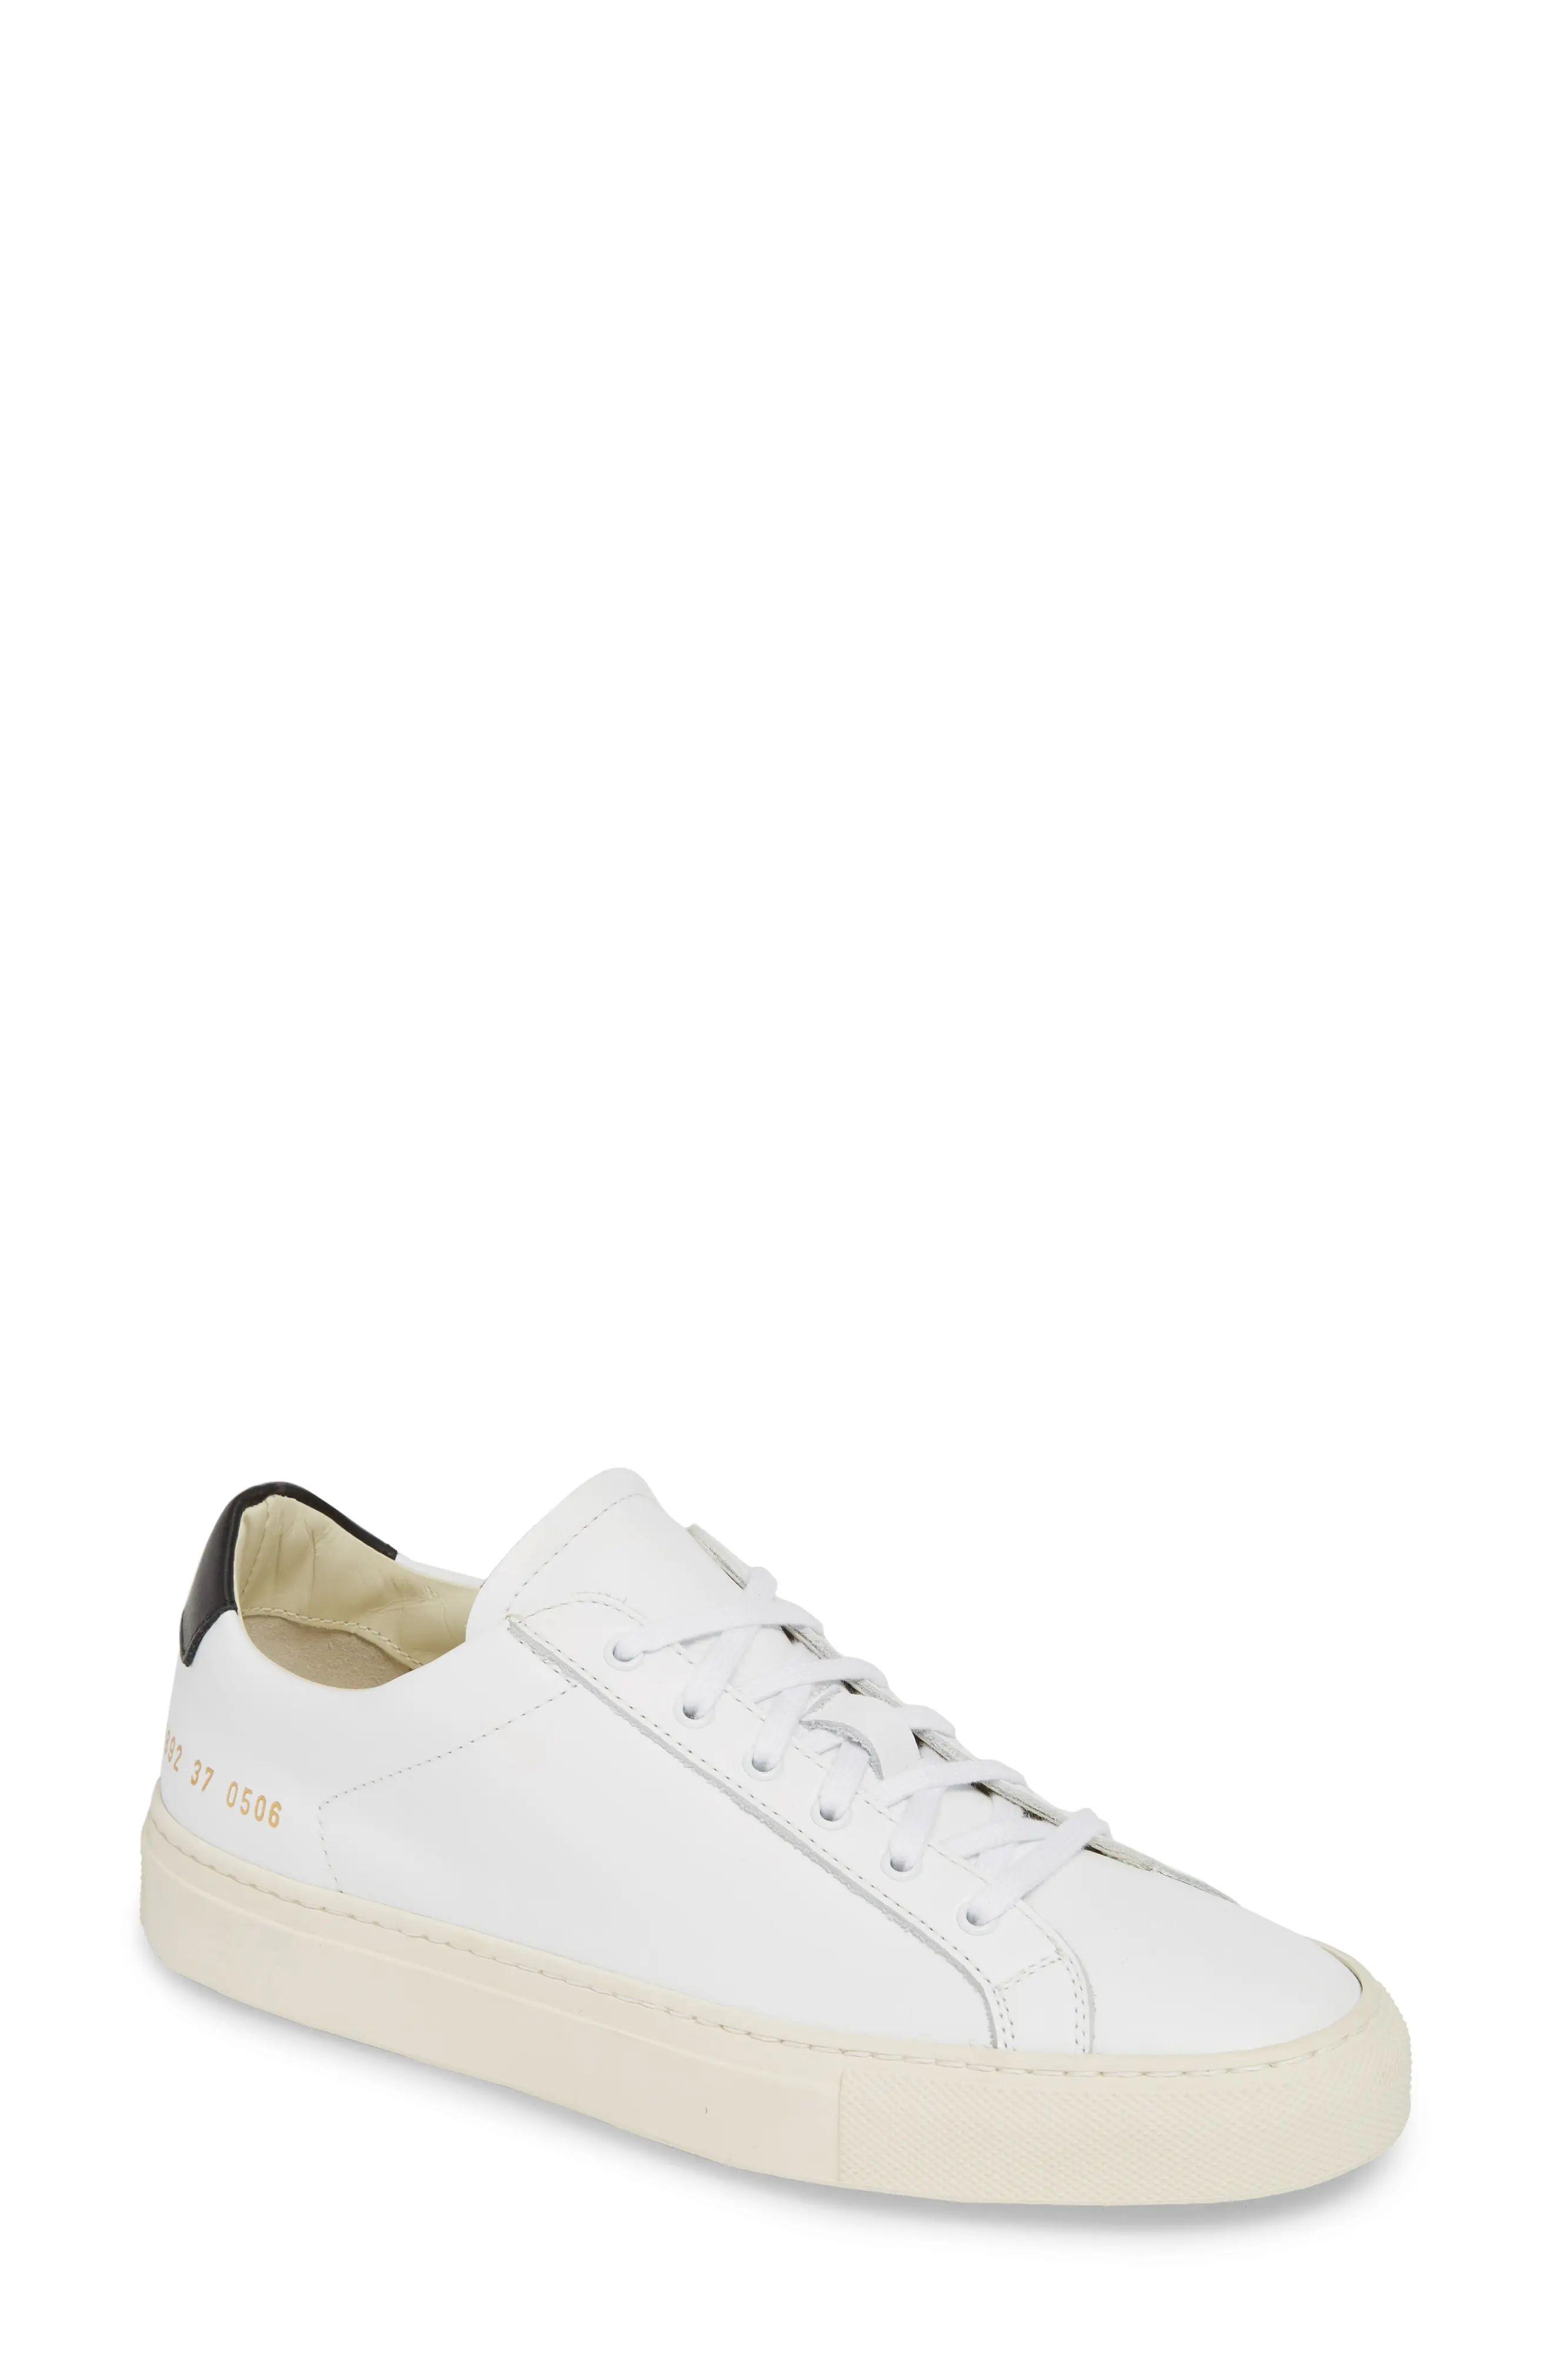 Women's Common Projects Retro Low Top Sneaker, Size 11US - White | Nordstrom